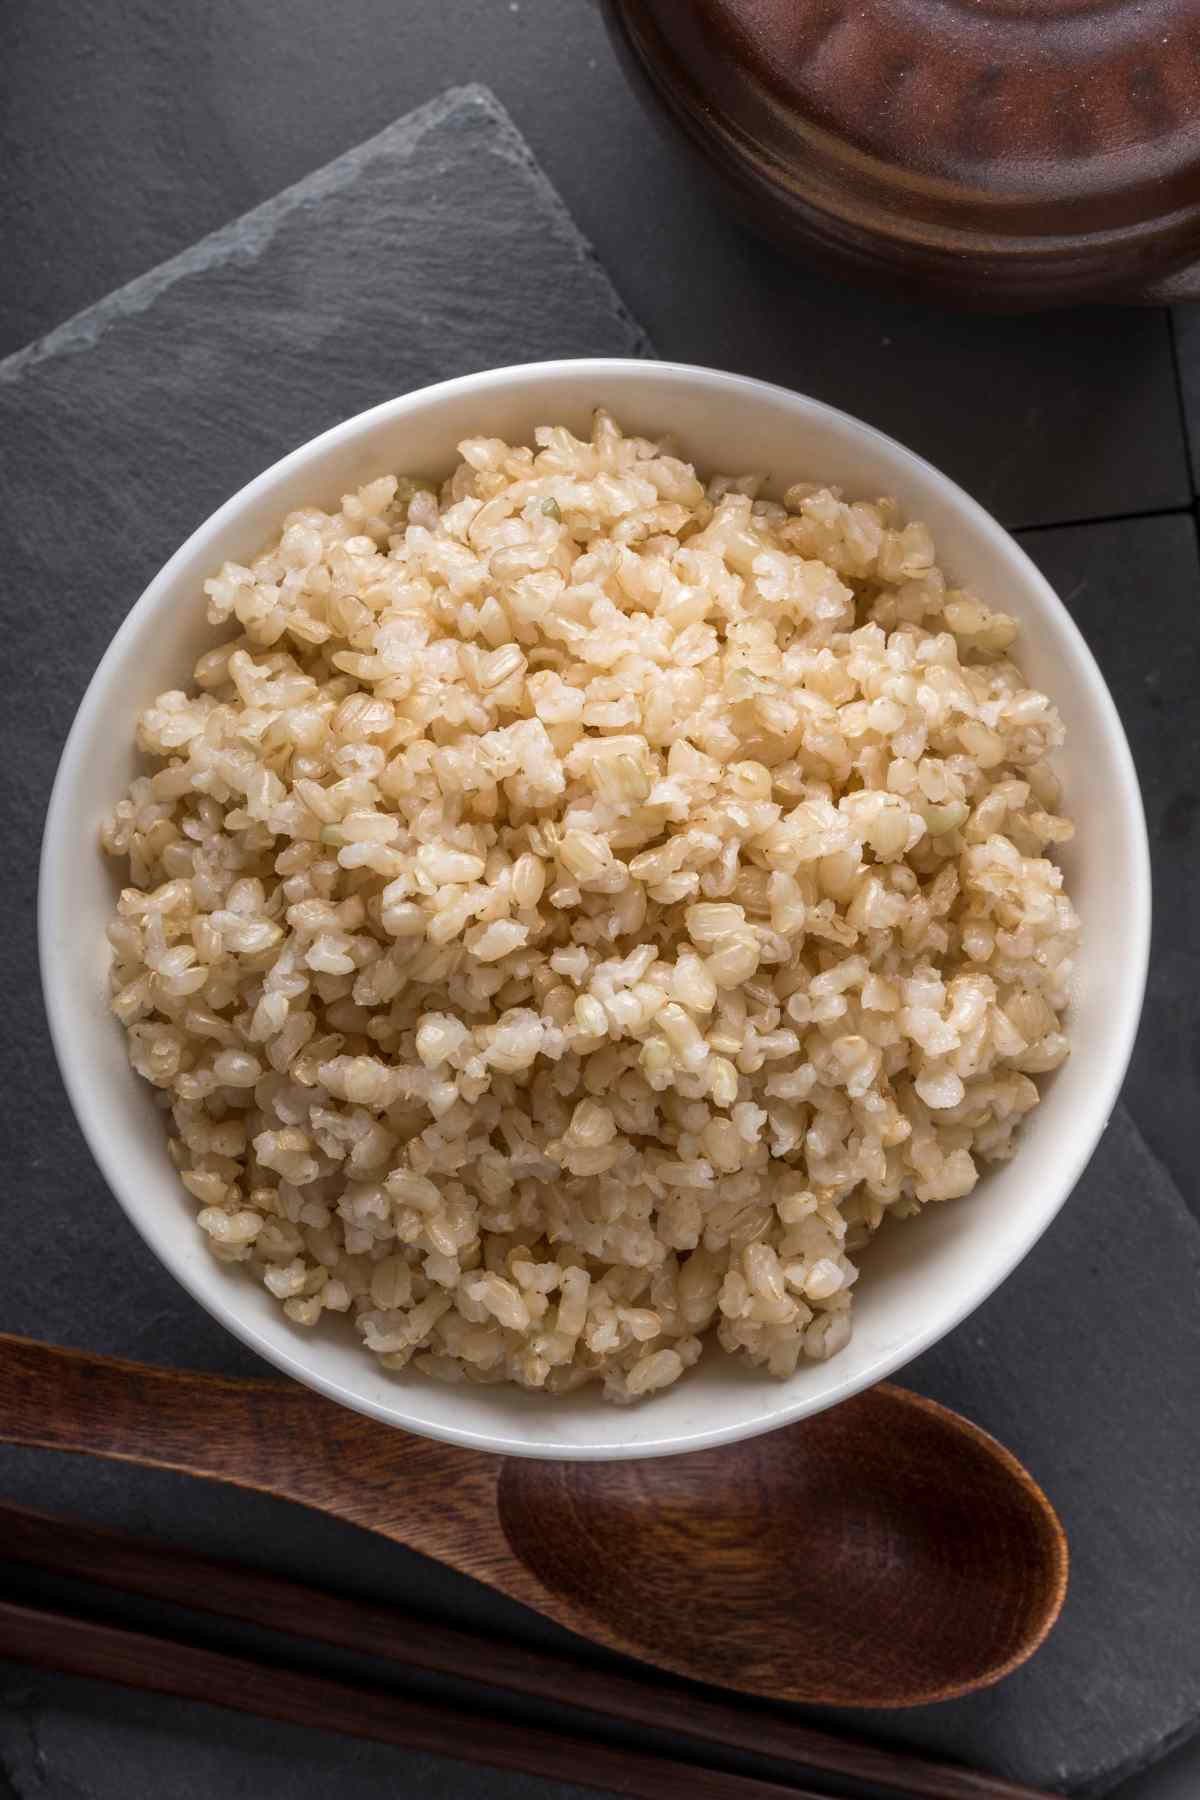 It’s well known that brown rice is more nutritious than white rice, but is it keto-friendly? In this post, we’ll cover everything you need to know about the carb content of brown rice, its nutritional profile, plus an easy way to fit “rice” into a ketogenic diet.